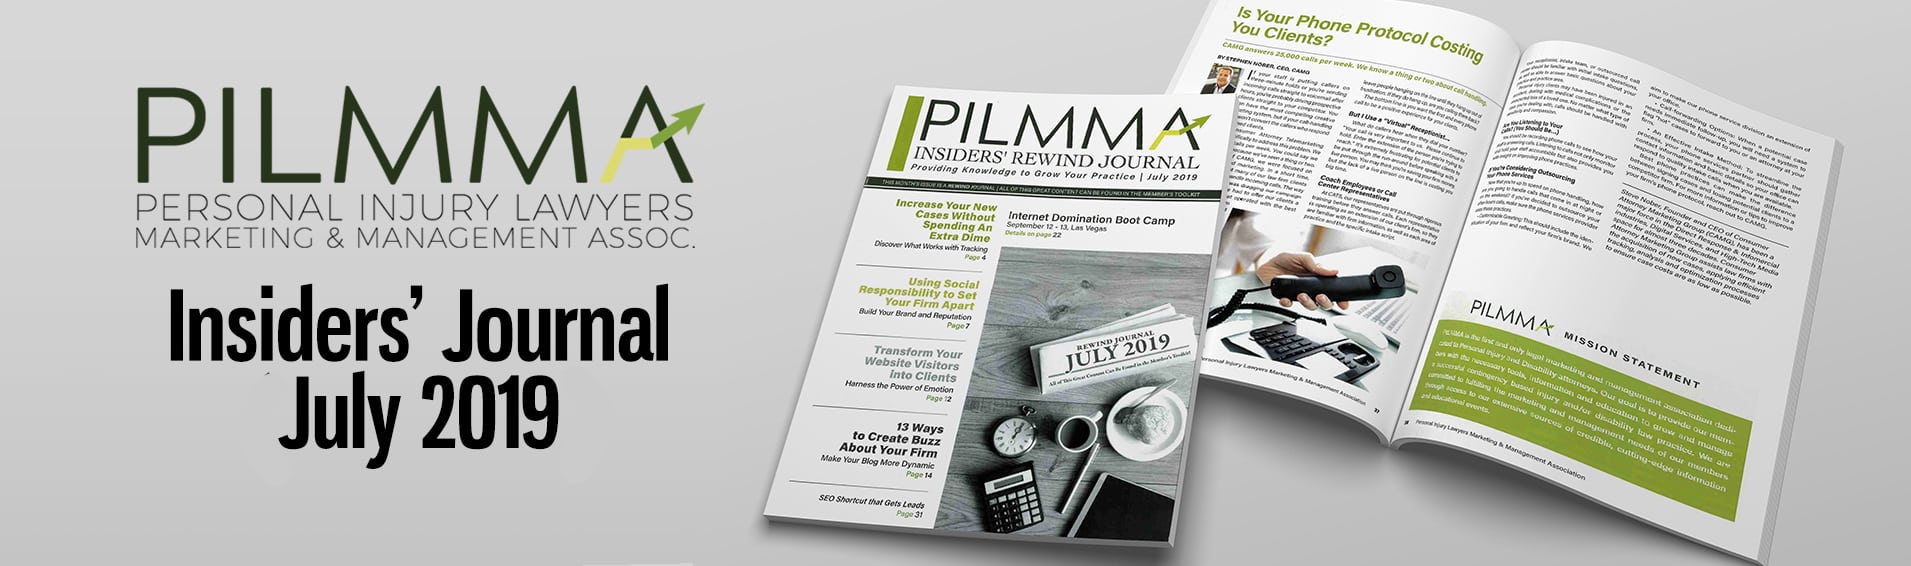 Graphic featuring PILMMA Insiders' Journal July 2019